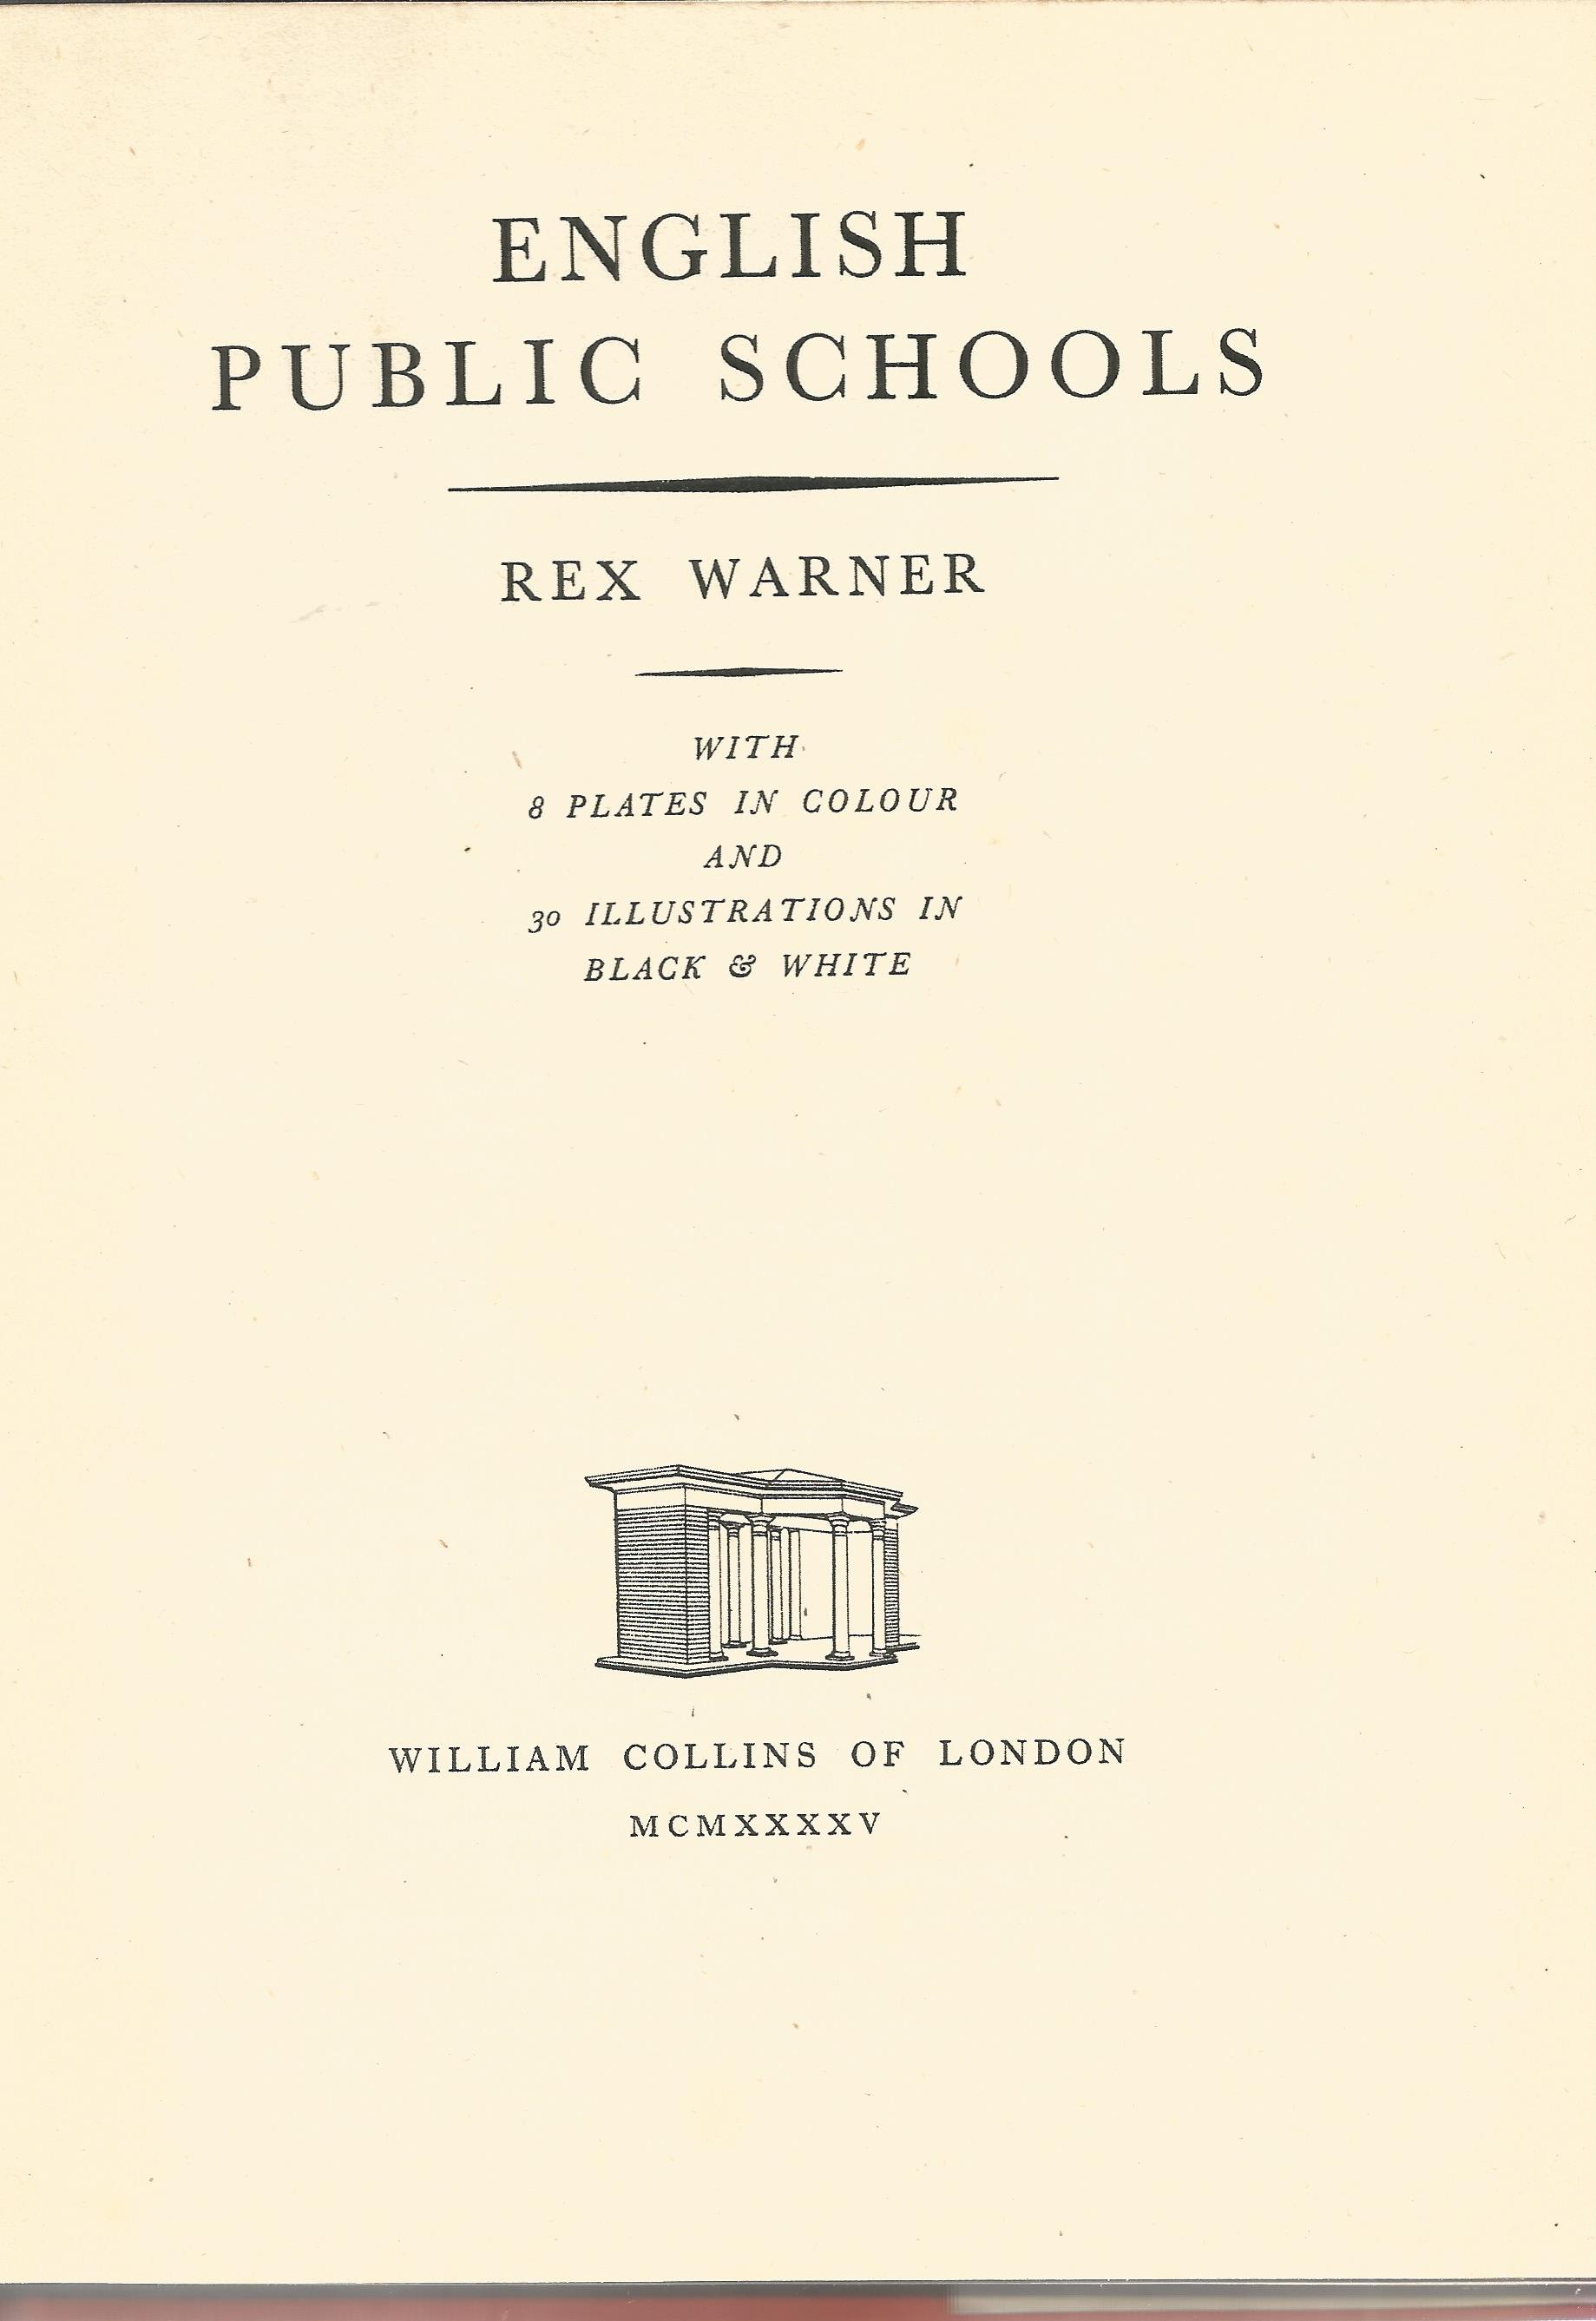 English Public Schools by Rex Warner 1945 Hardback Book published by William Collins Ltd some ageing - Image 2 of 2